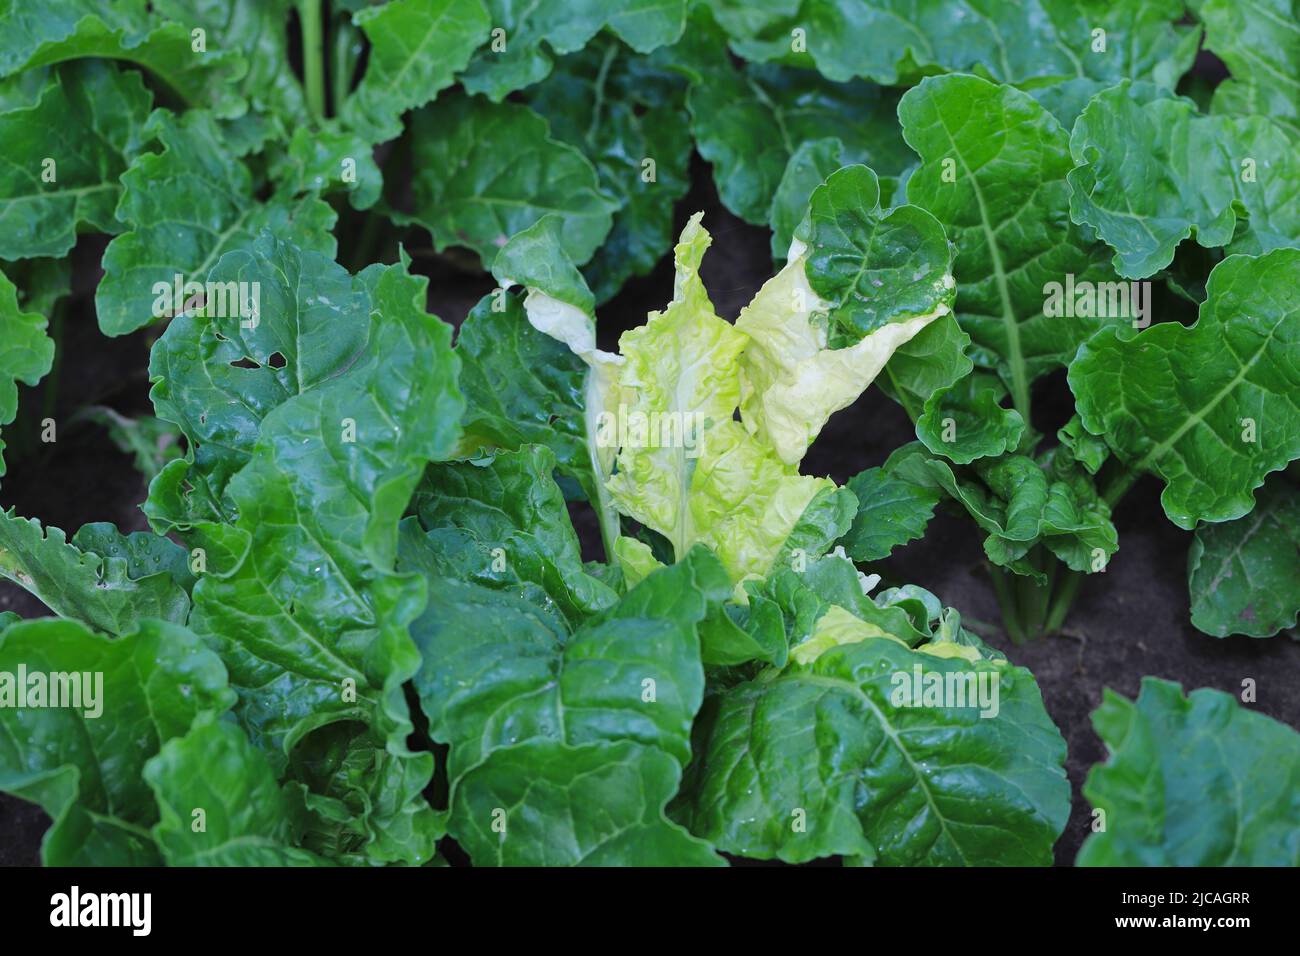 Discolored sugar beet leaves in the field. Albinistic, albino, chlorophyll-deficient leaves. Genetic mutation. Stock Photo